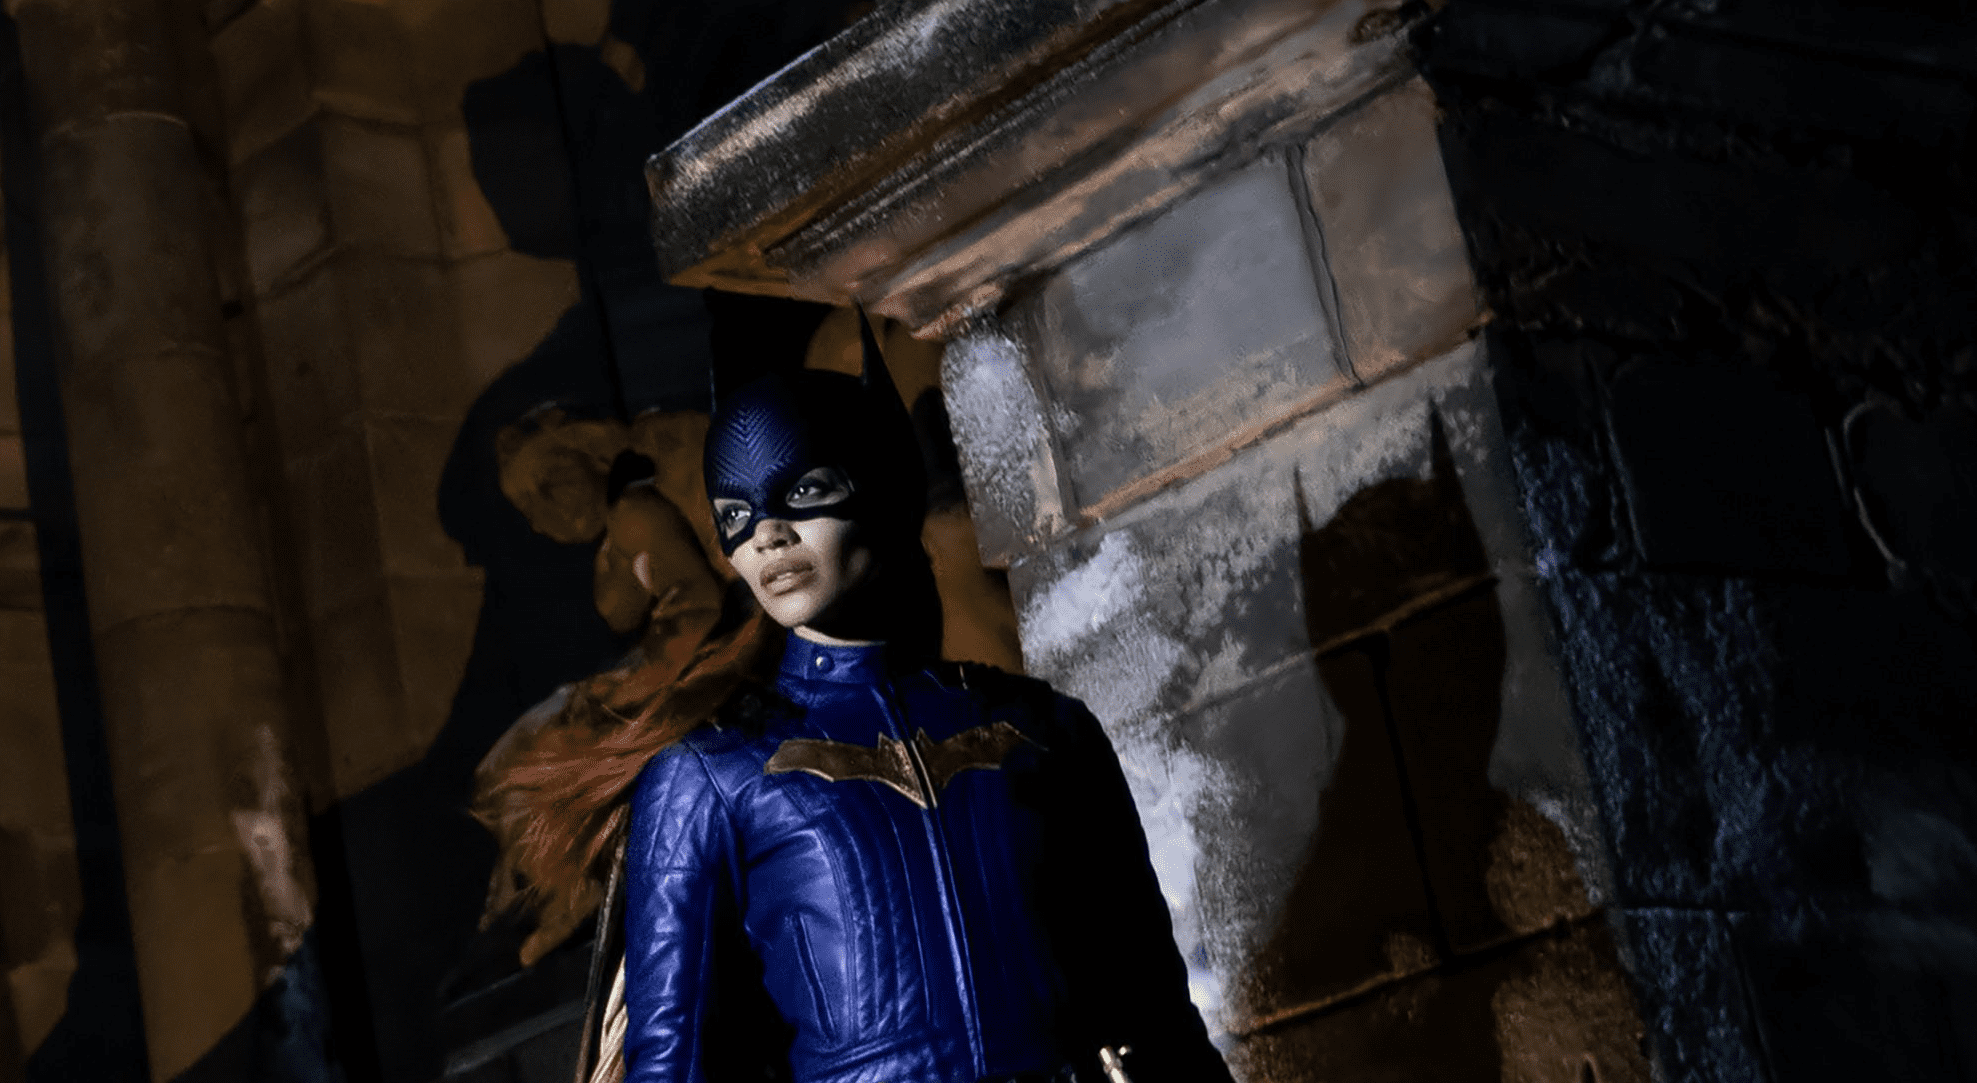 Batgirl Star Leslie Grace Shares First Image Of Batsuit From Upcoming Film